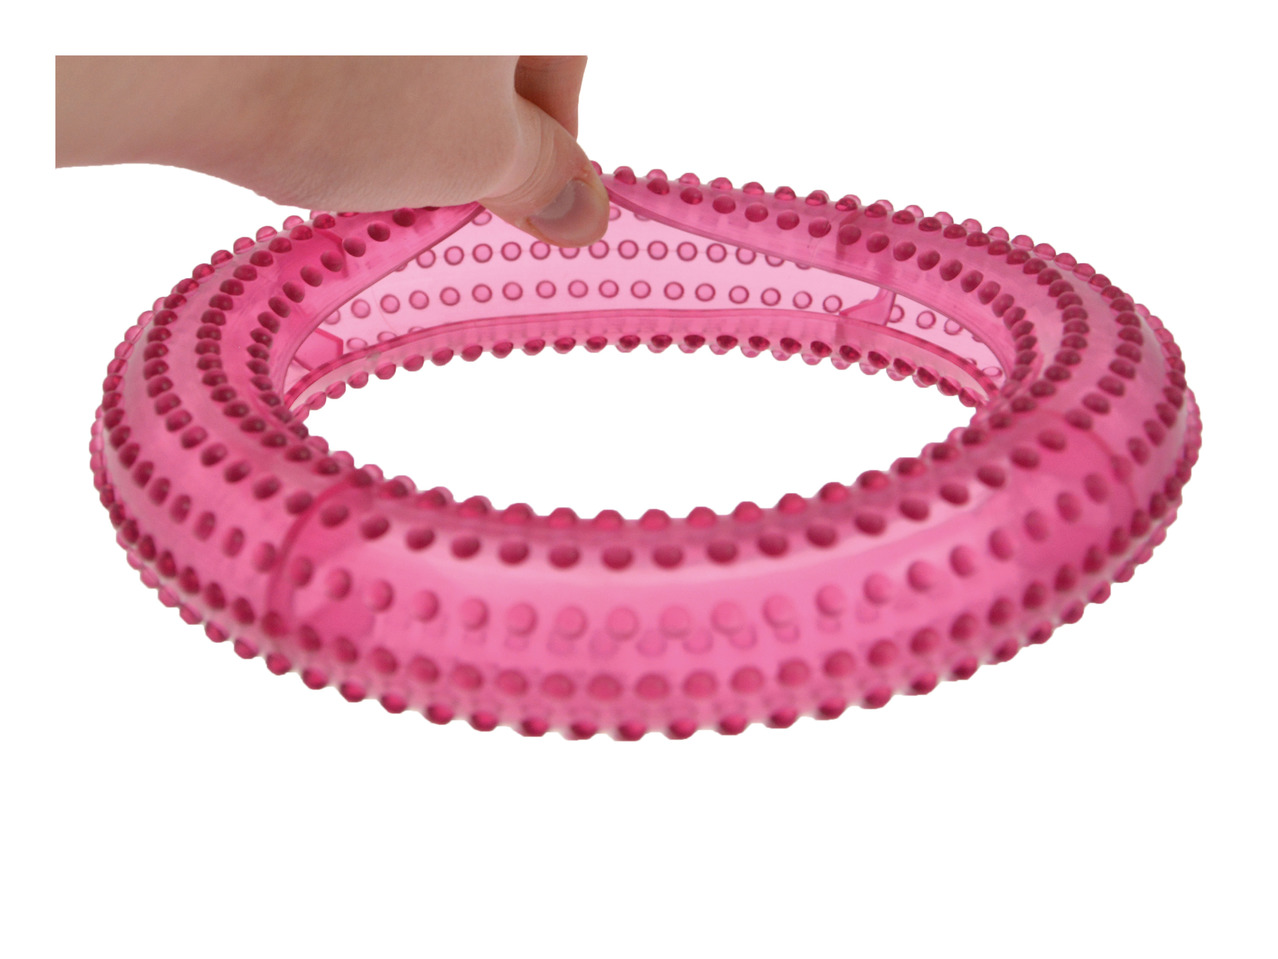 The Pet Store Jelly Dog Toy1